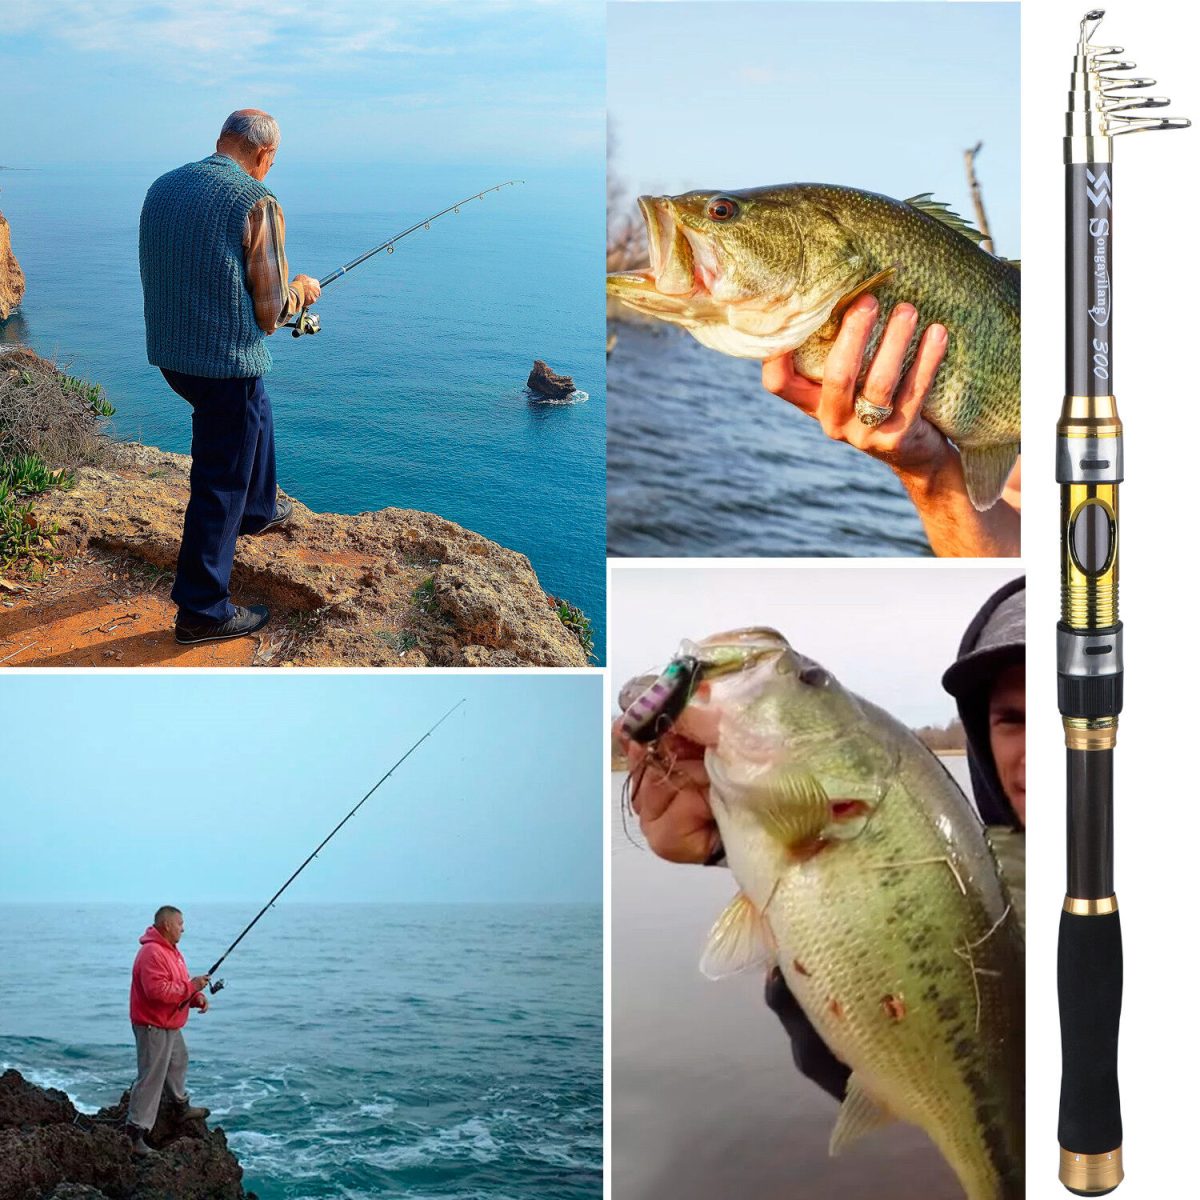 Carbon Fiber Fishing Rod & Reel Complete Kit Set with 5G-5000 Gear Spinning Reel Line, Lures & Bait, Fishing Line, Fishing Tackle & Carrying Bag